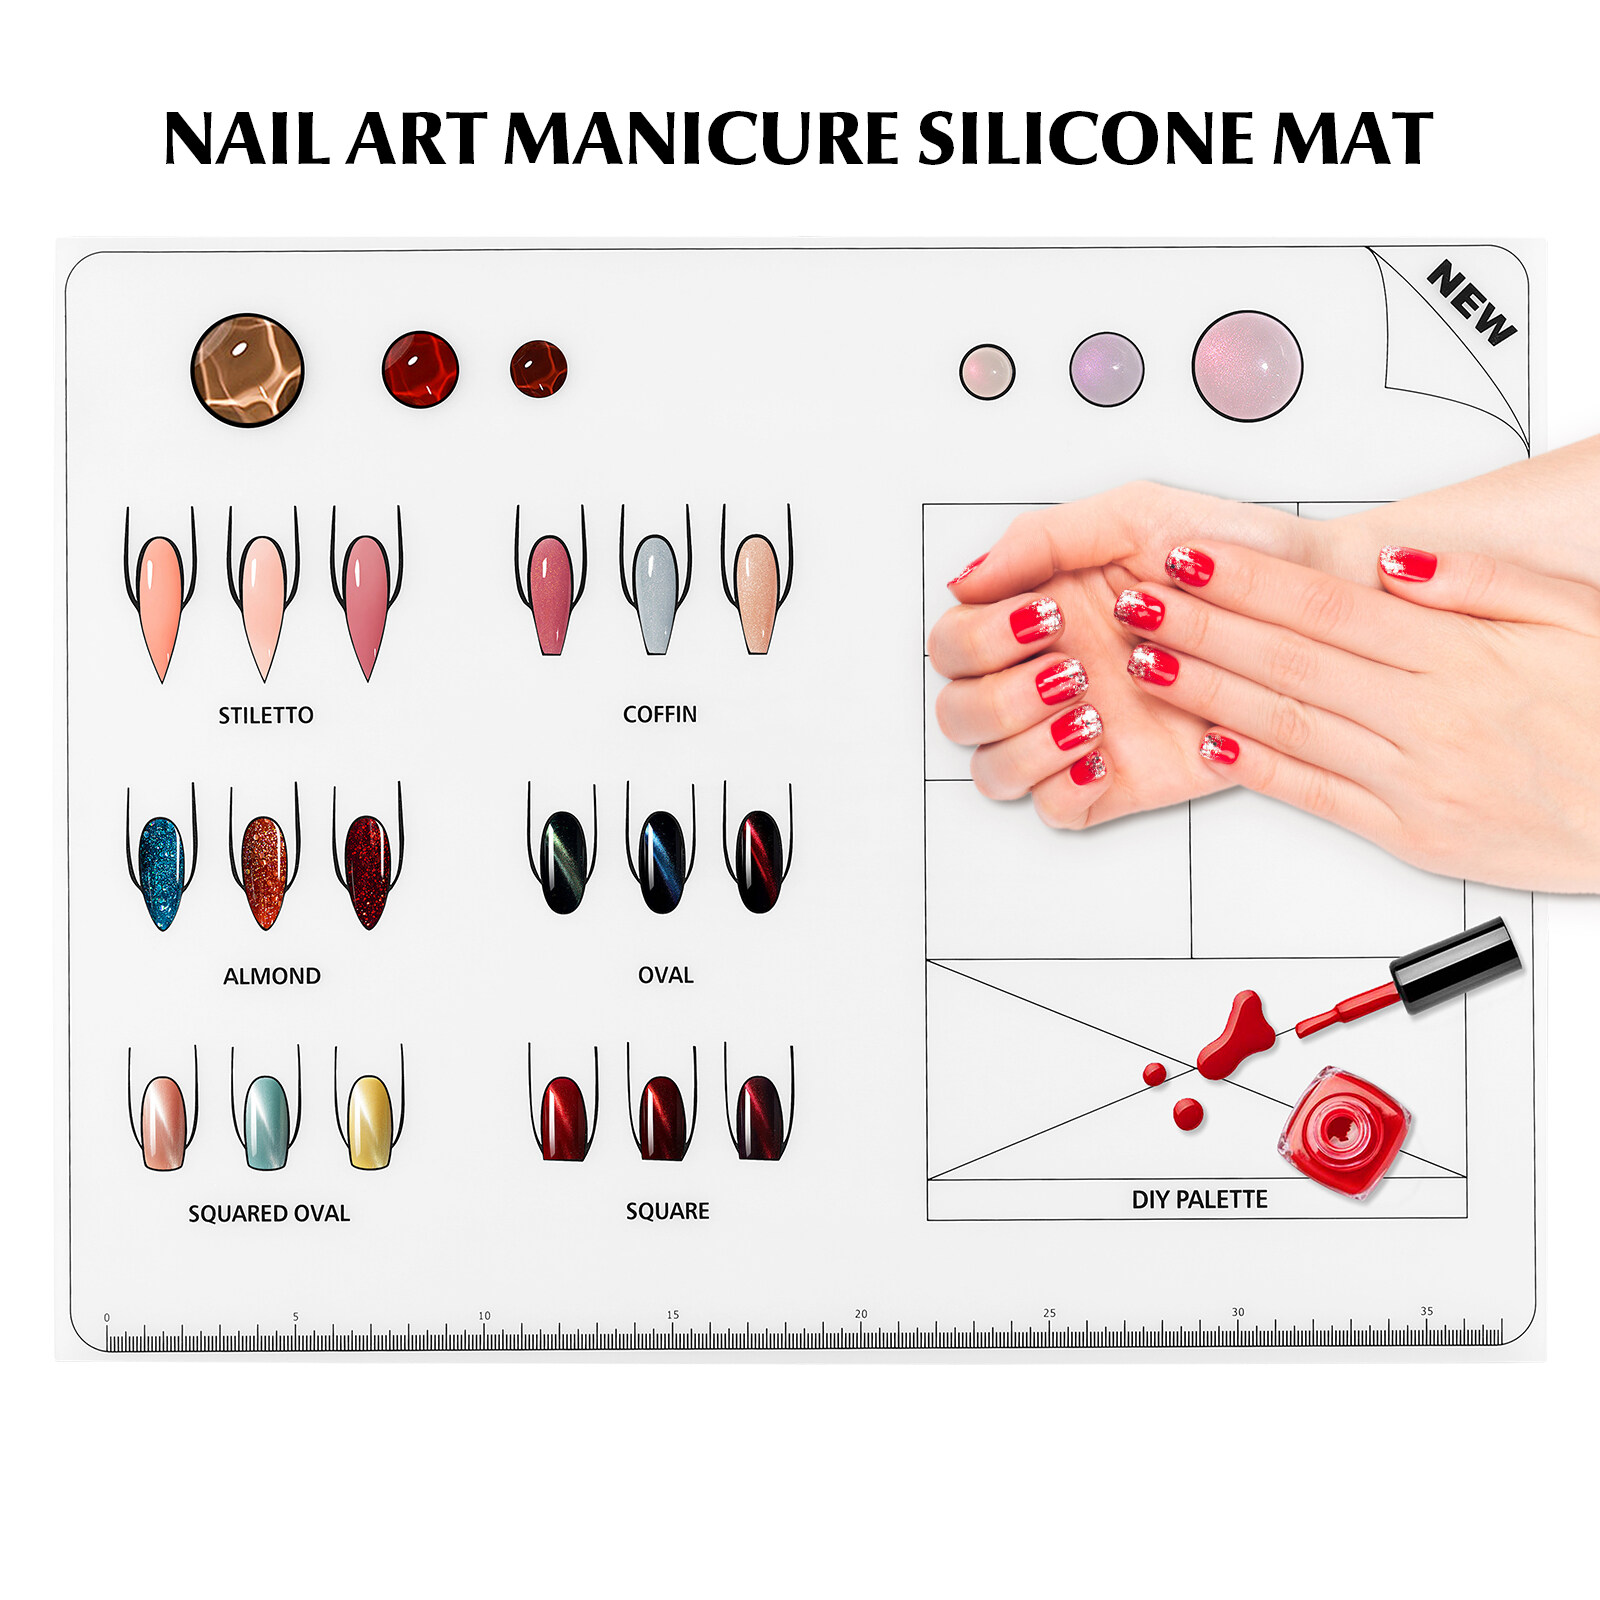 Eease Acrylic Nail Mat Silicone Training Sheet Flexible Roll Up Pad for Acrylic Fingernails Nail Practice Supply, Size: 40x30cm